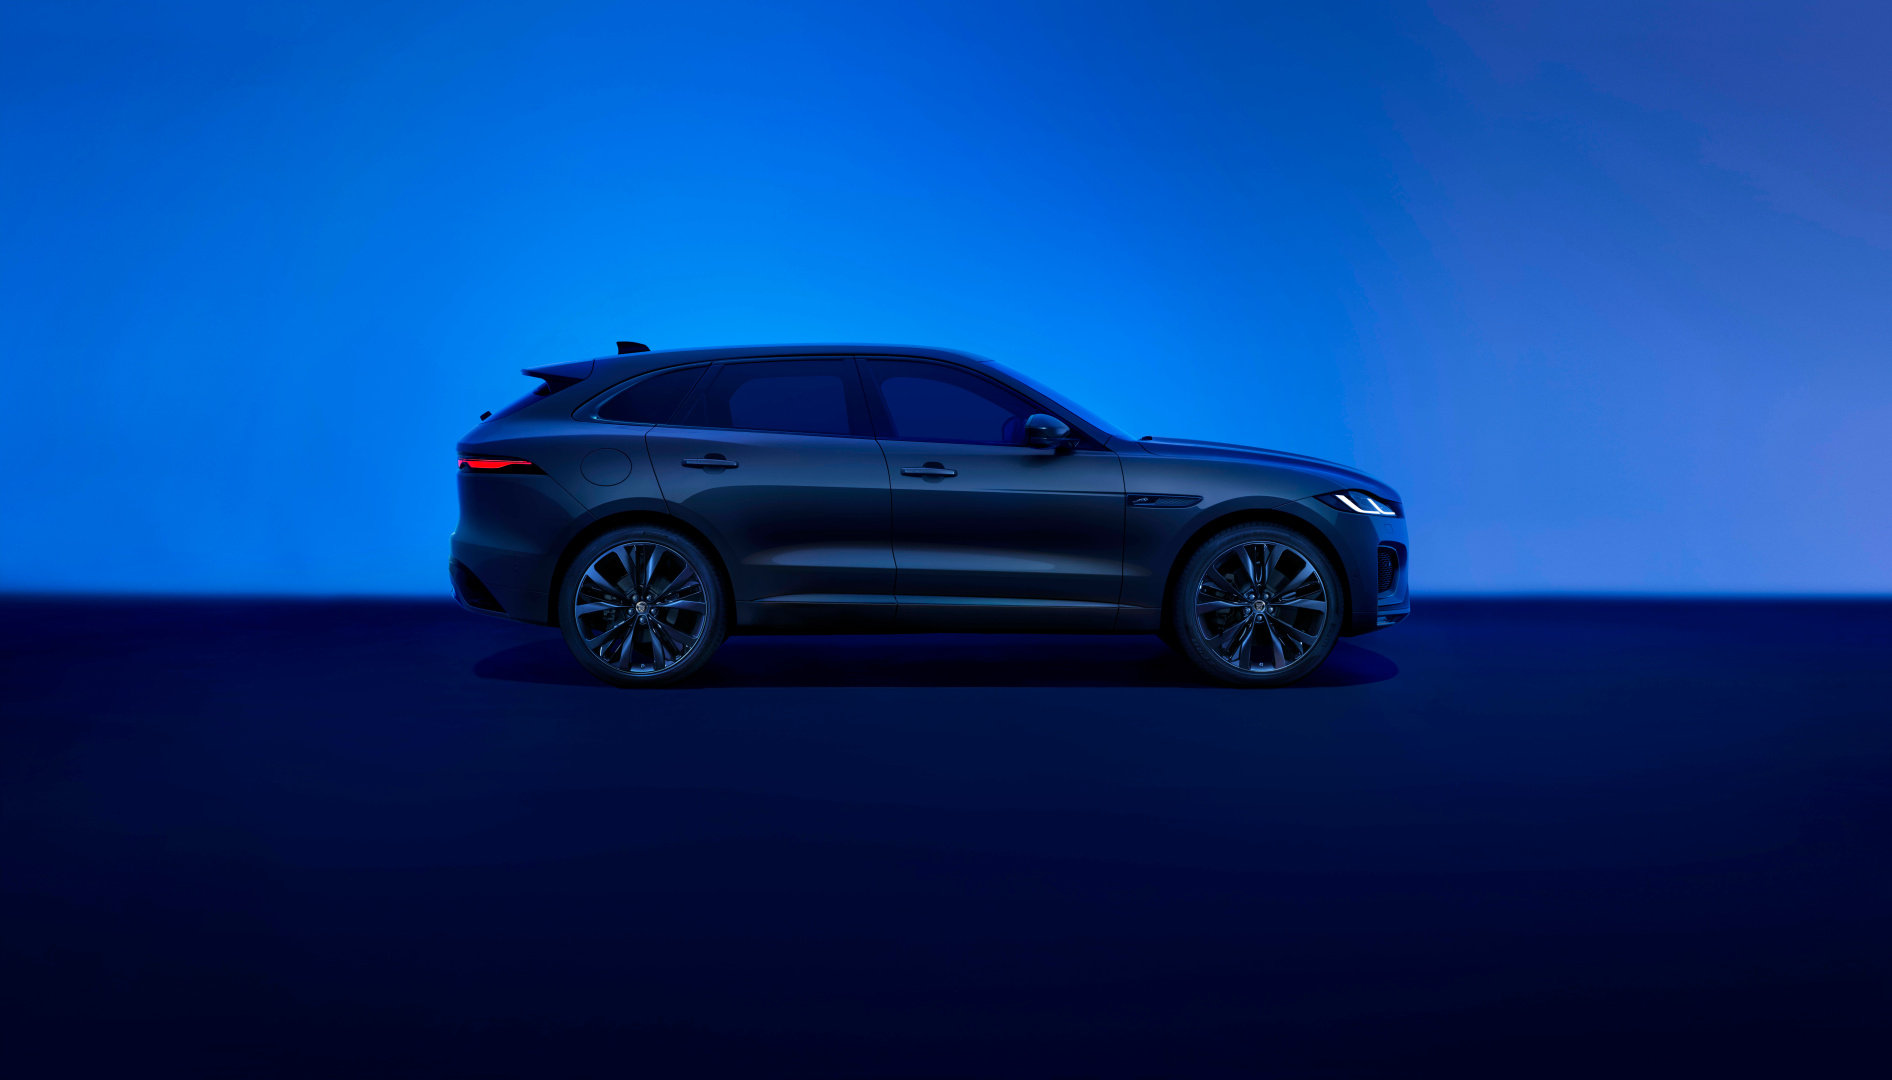 SMALL_Jag_F-PACE_24MY_Exterior_04_Side_GL_059_DX_141222